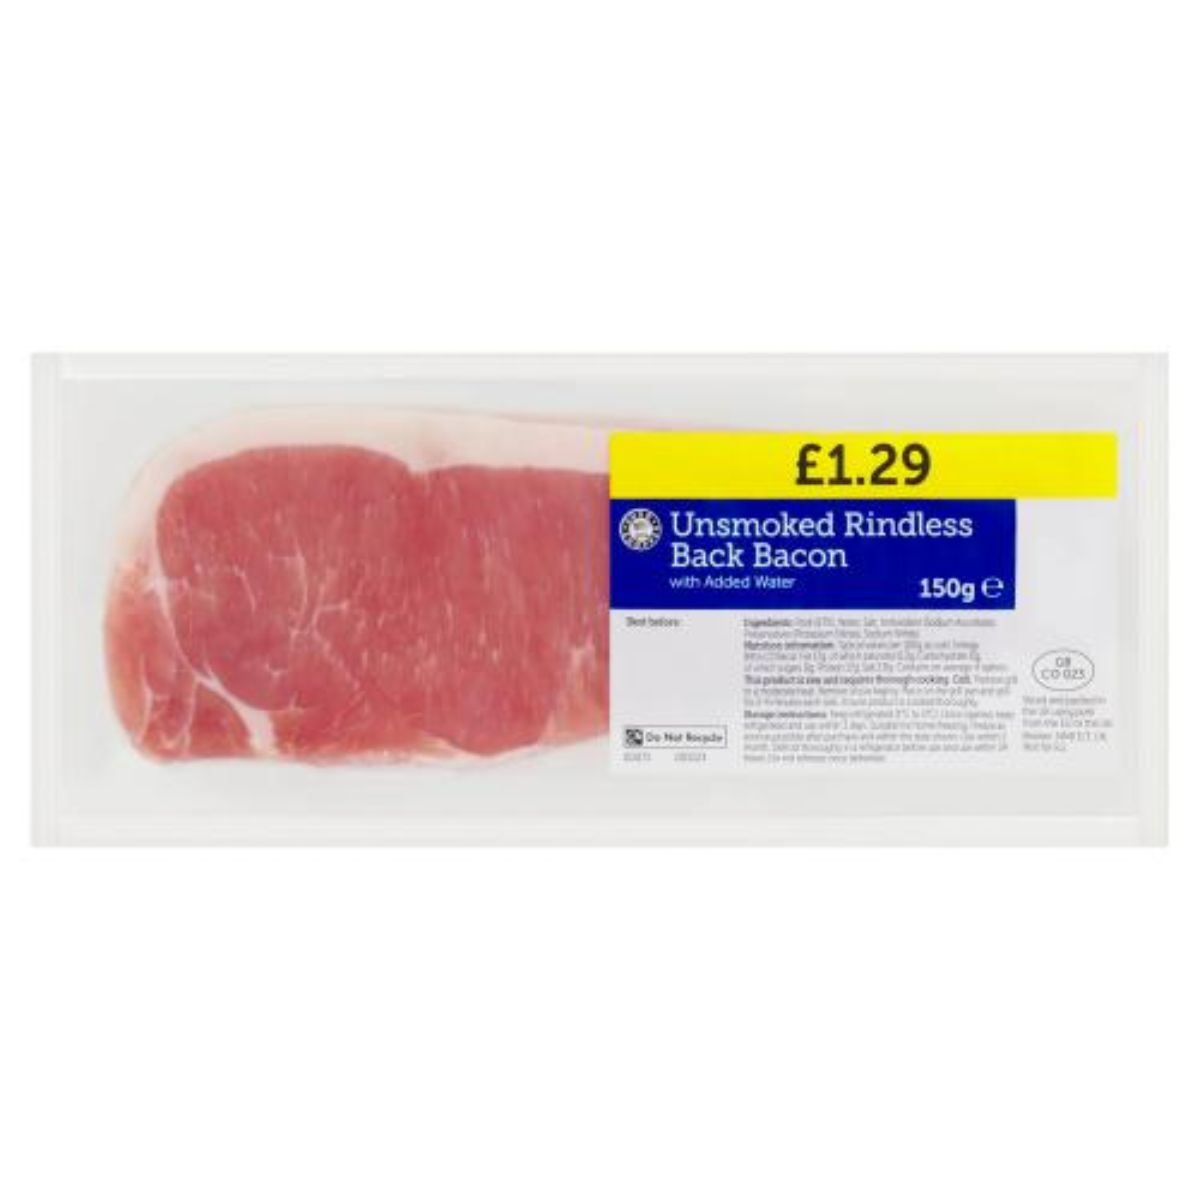 A package of Euro Shopper Unsmoked Bacon - 150g on a white background.